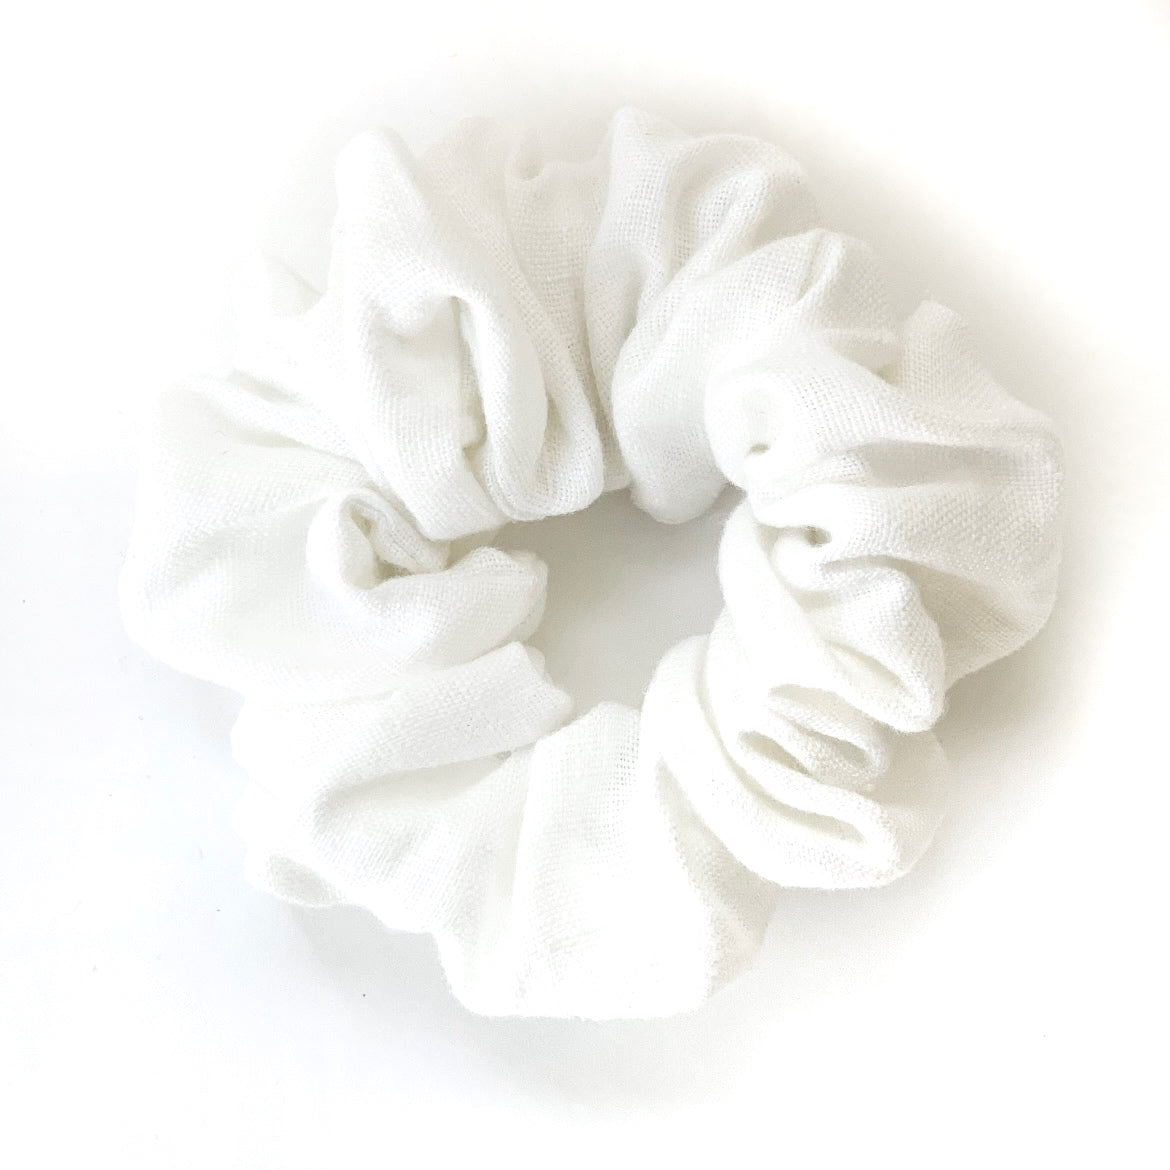  These beautiful linen scrunchies are hand sewn and come in two natural tones. They are high quality and match every outfit!  White